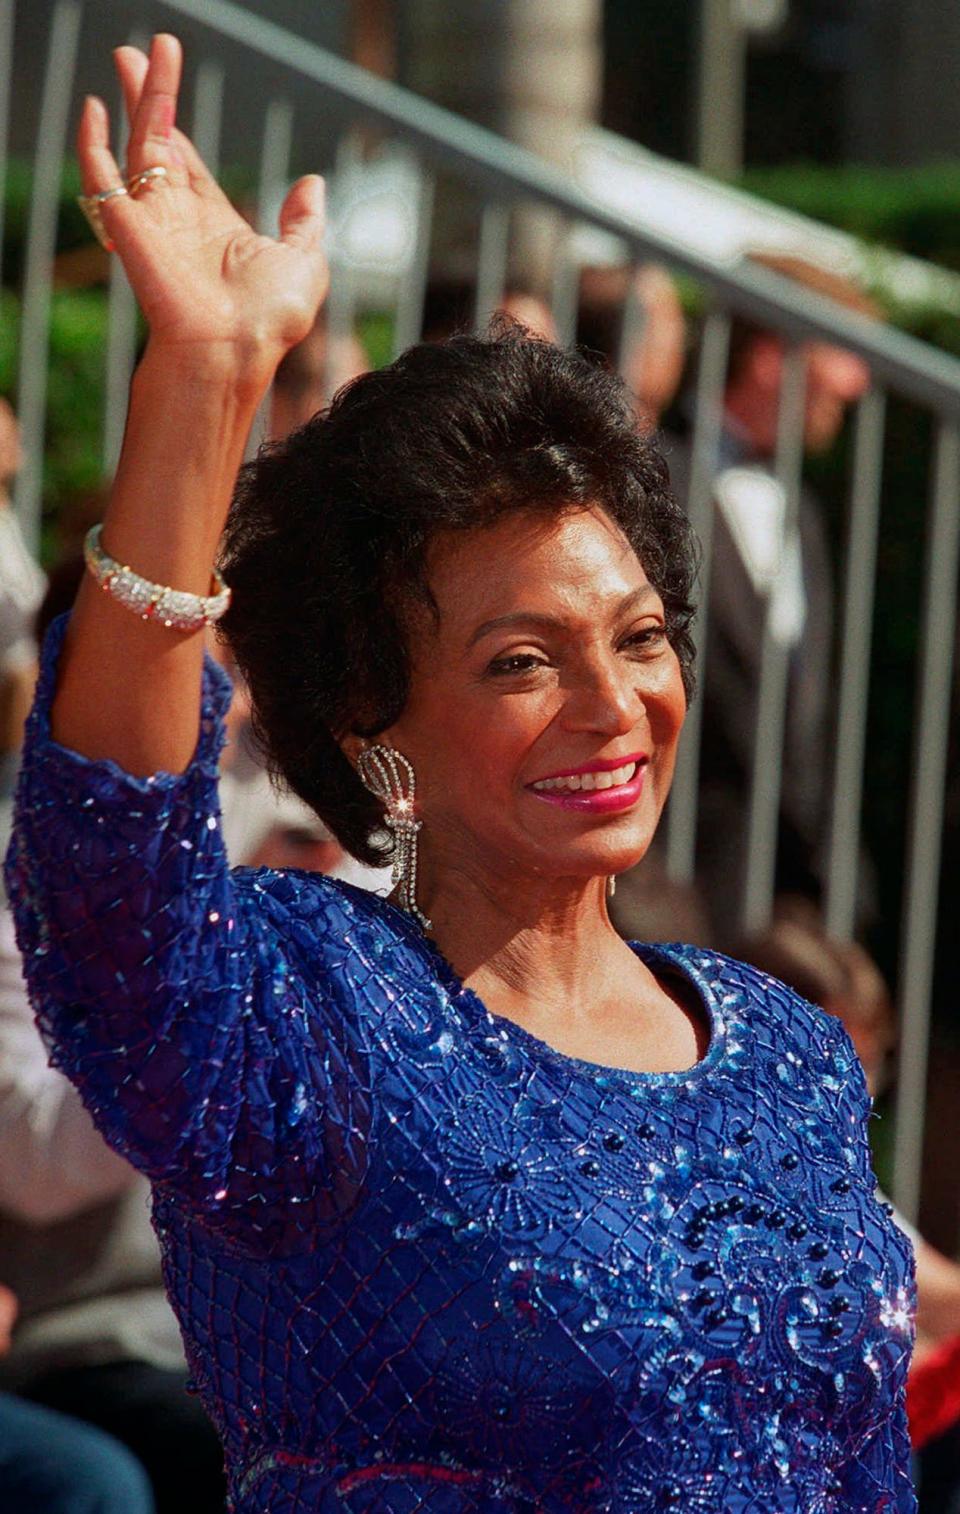 Nichelle Nichols, who played Lt. Ntoya Uhura on ''Star Trek,'' waves as she arrives at the "Star Trek: 30 Years and Beyond" tribute at Paramount Studios in Los Angeles on Oct. 6, 1996.